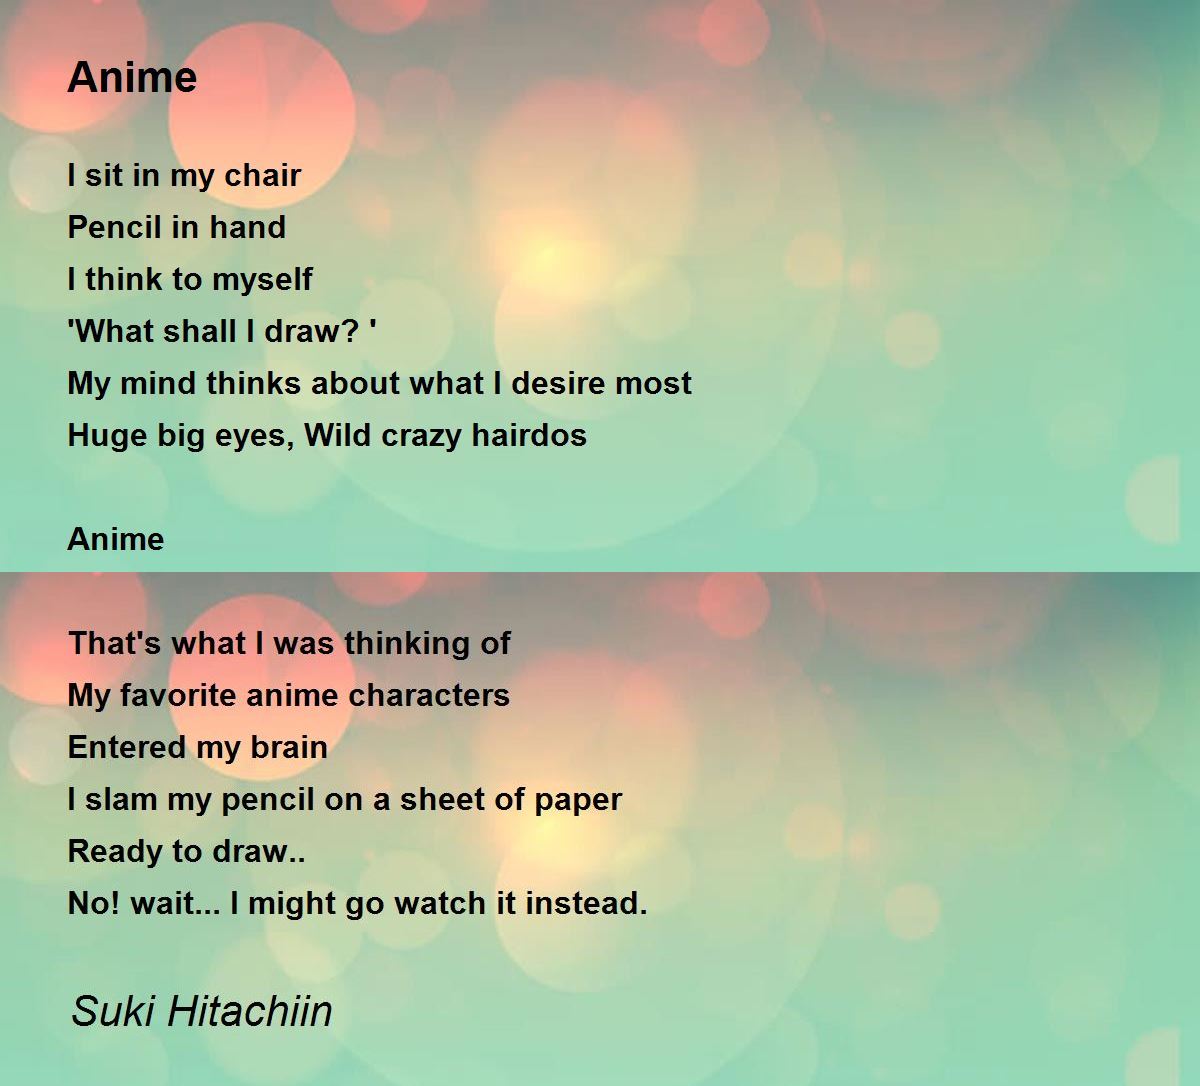 Chihayafuru - Cards! Poetry! Poetry on Cards! - Anime & More - Waypoint -  Forum